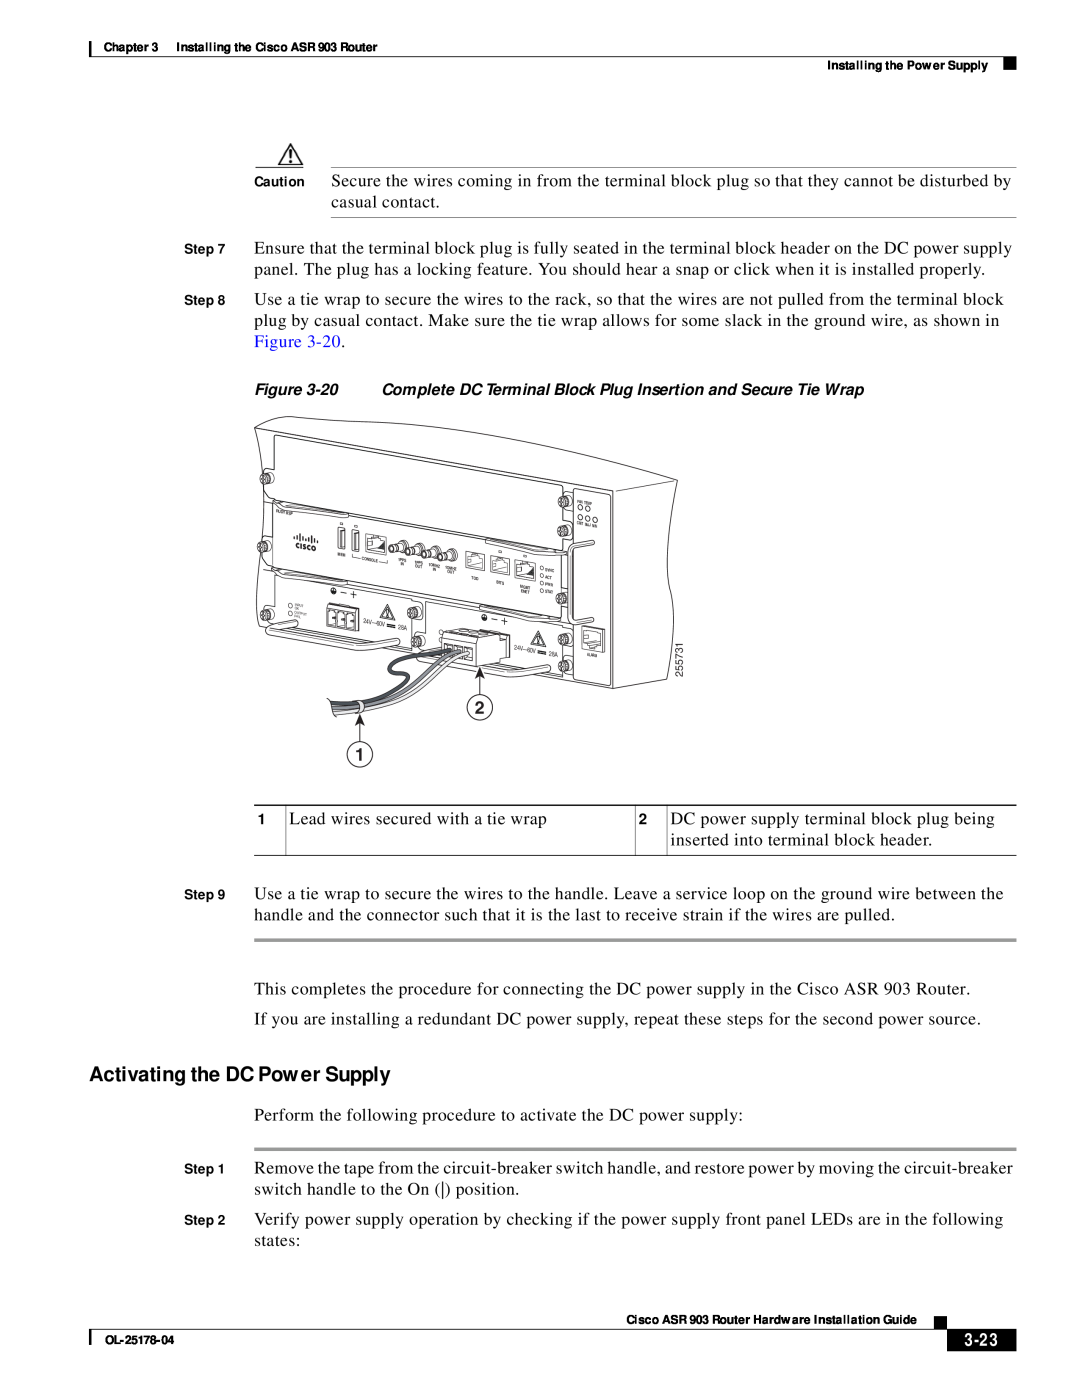 Cisco Systems ASR 903 manual Activating the DC Power Supply, 3-23 